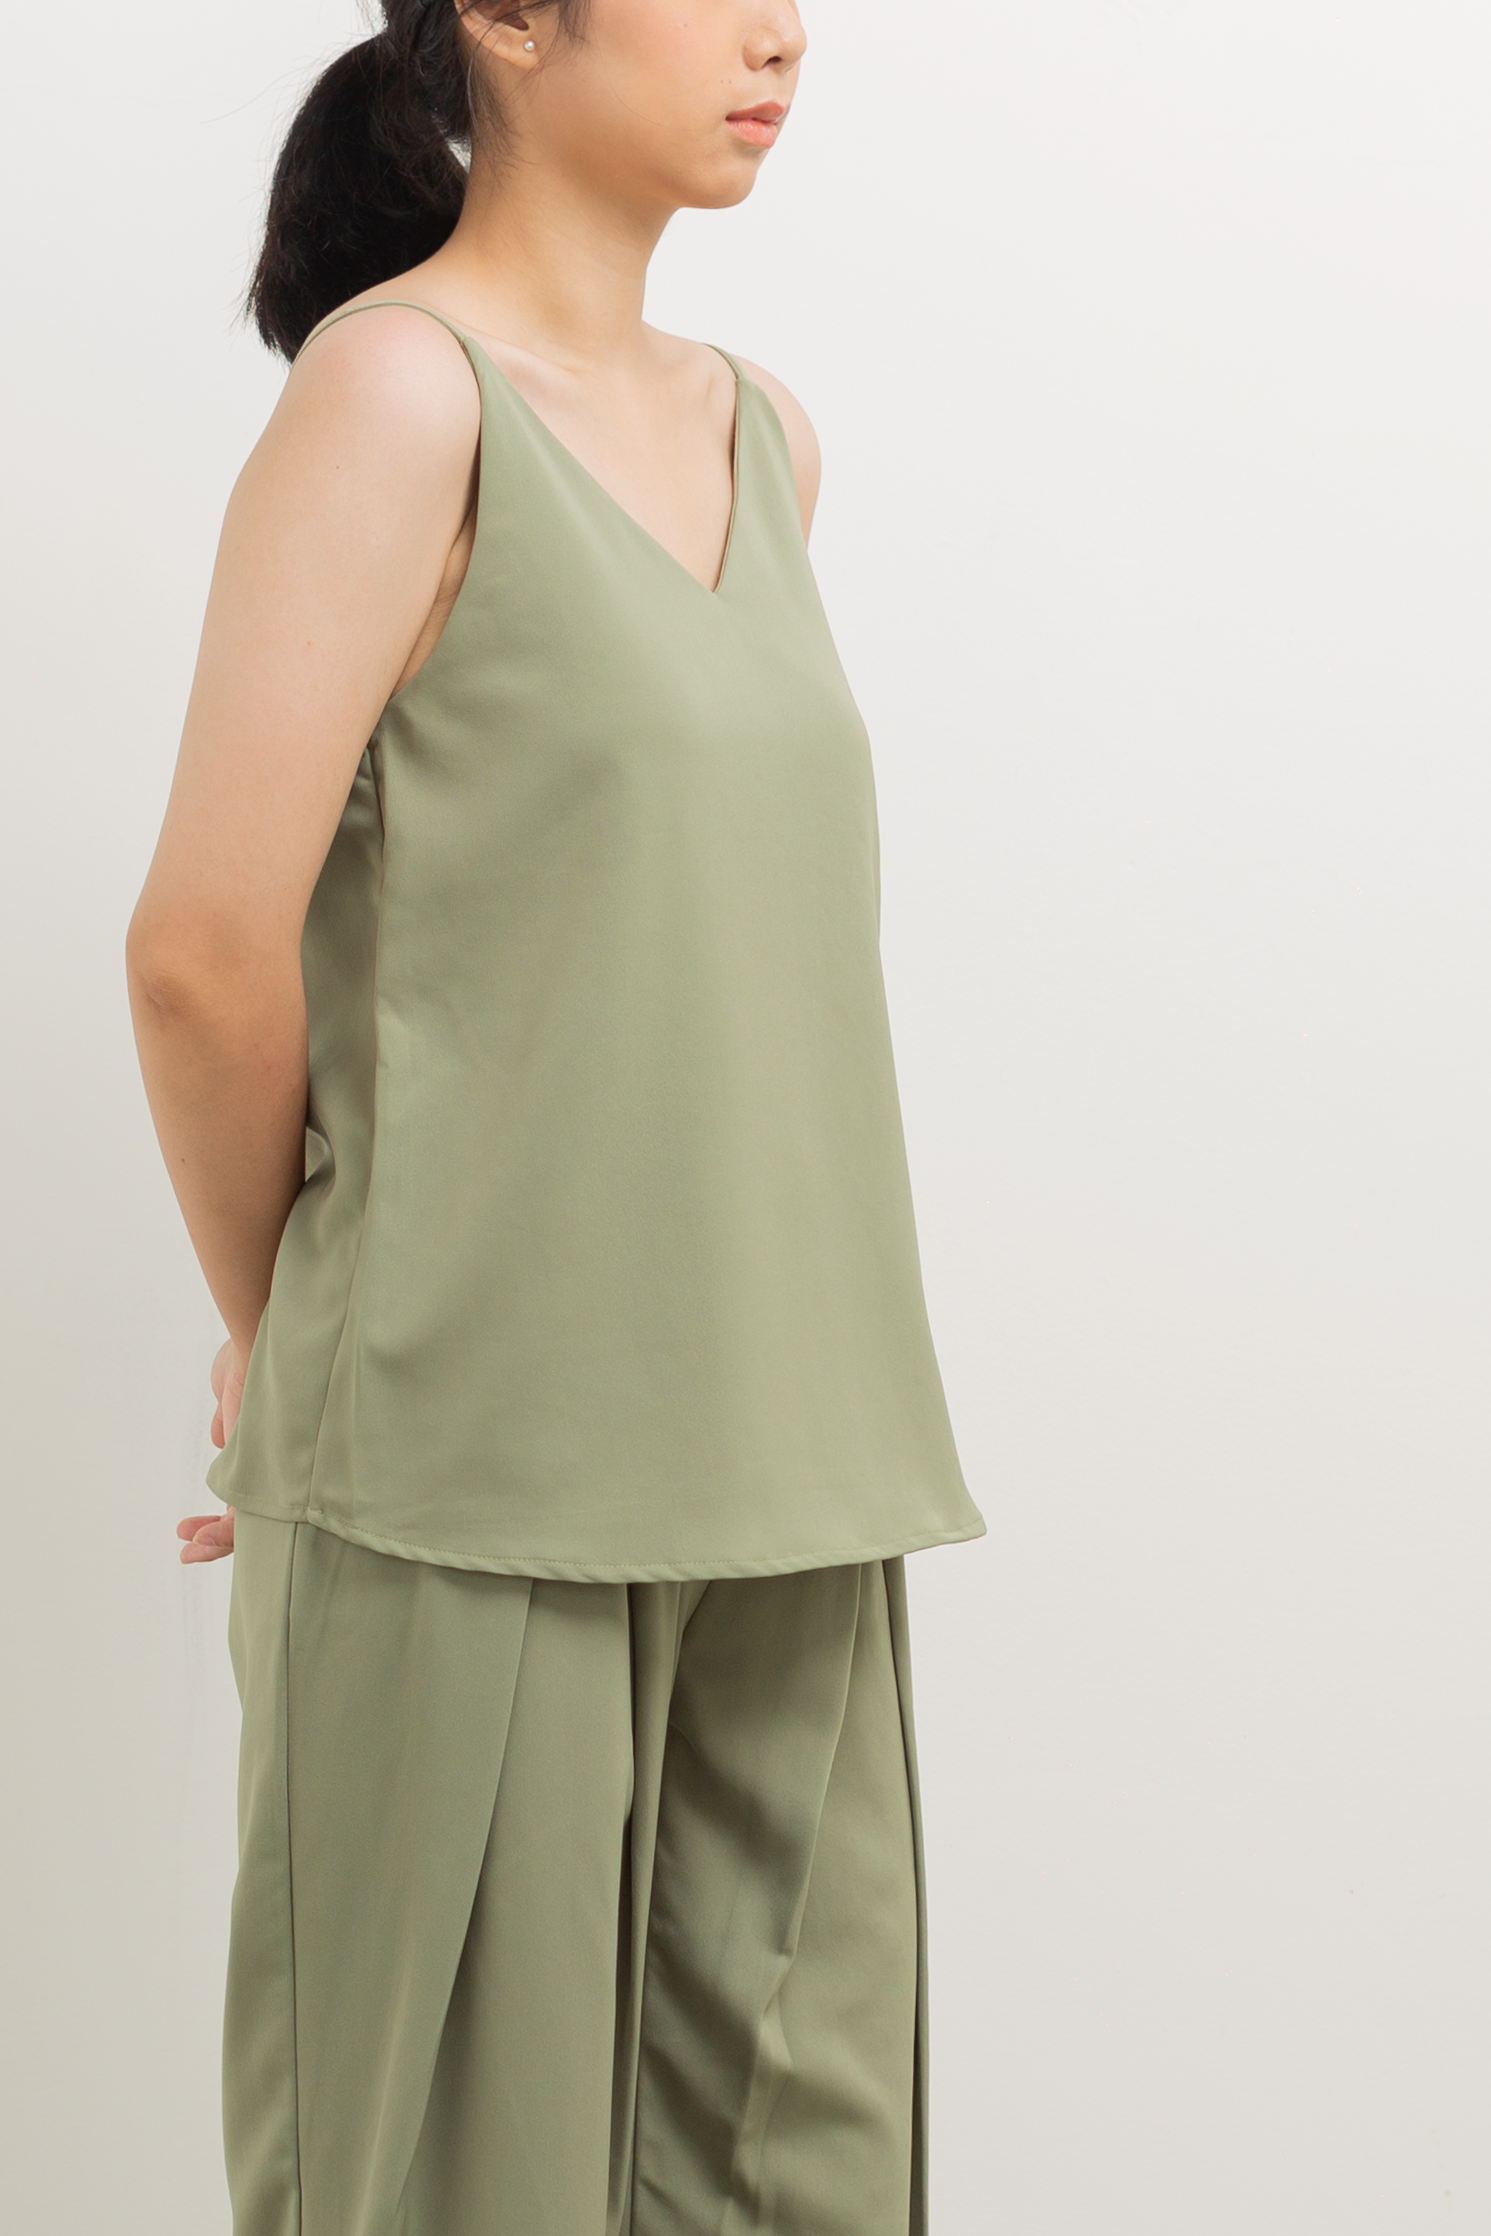 Reversible Camisole Top in Green